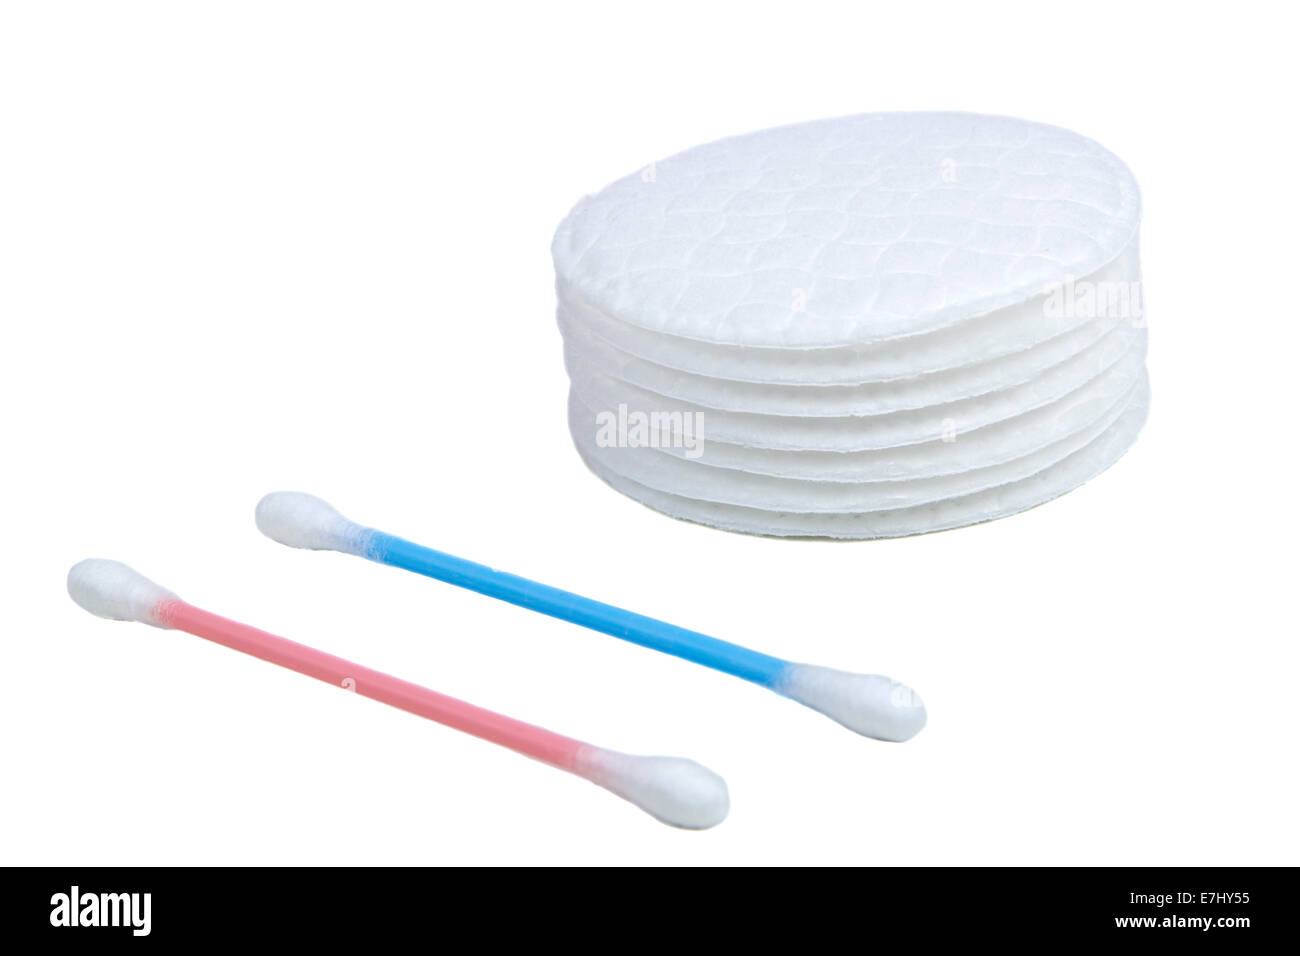 Cotton swabs and sticks isolated on white background Stock Photo